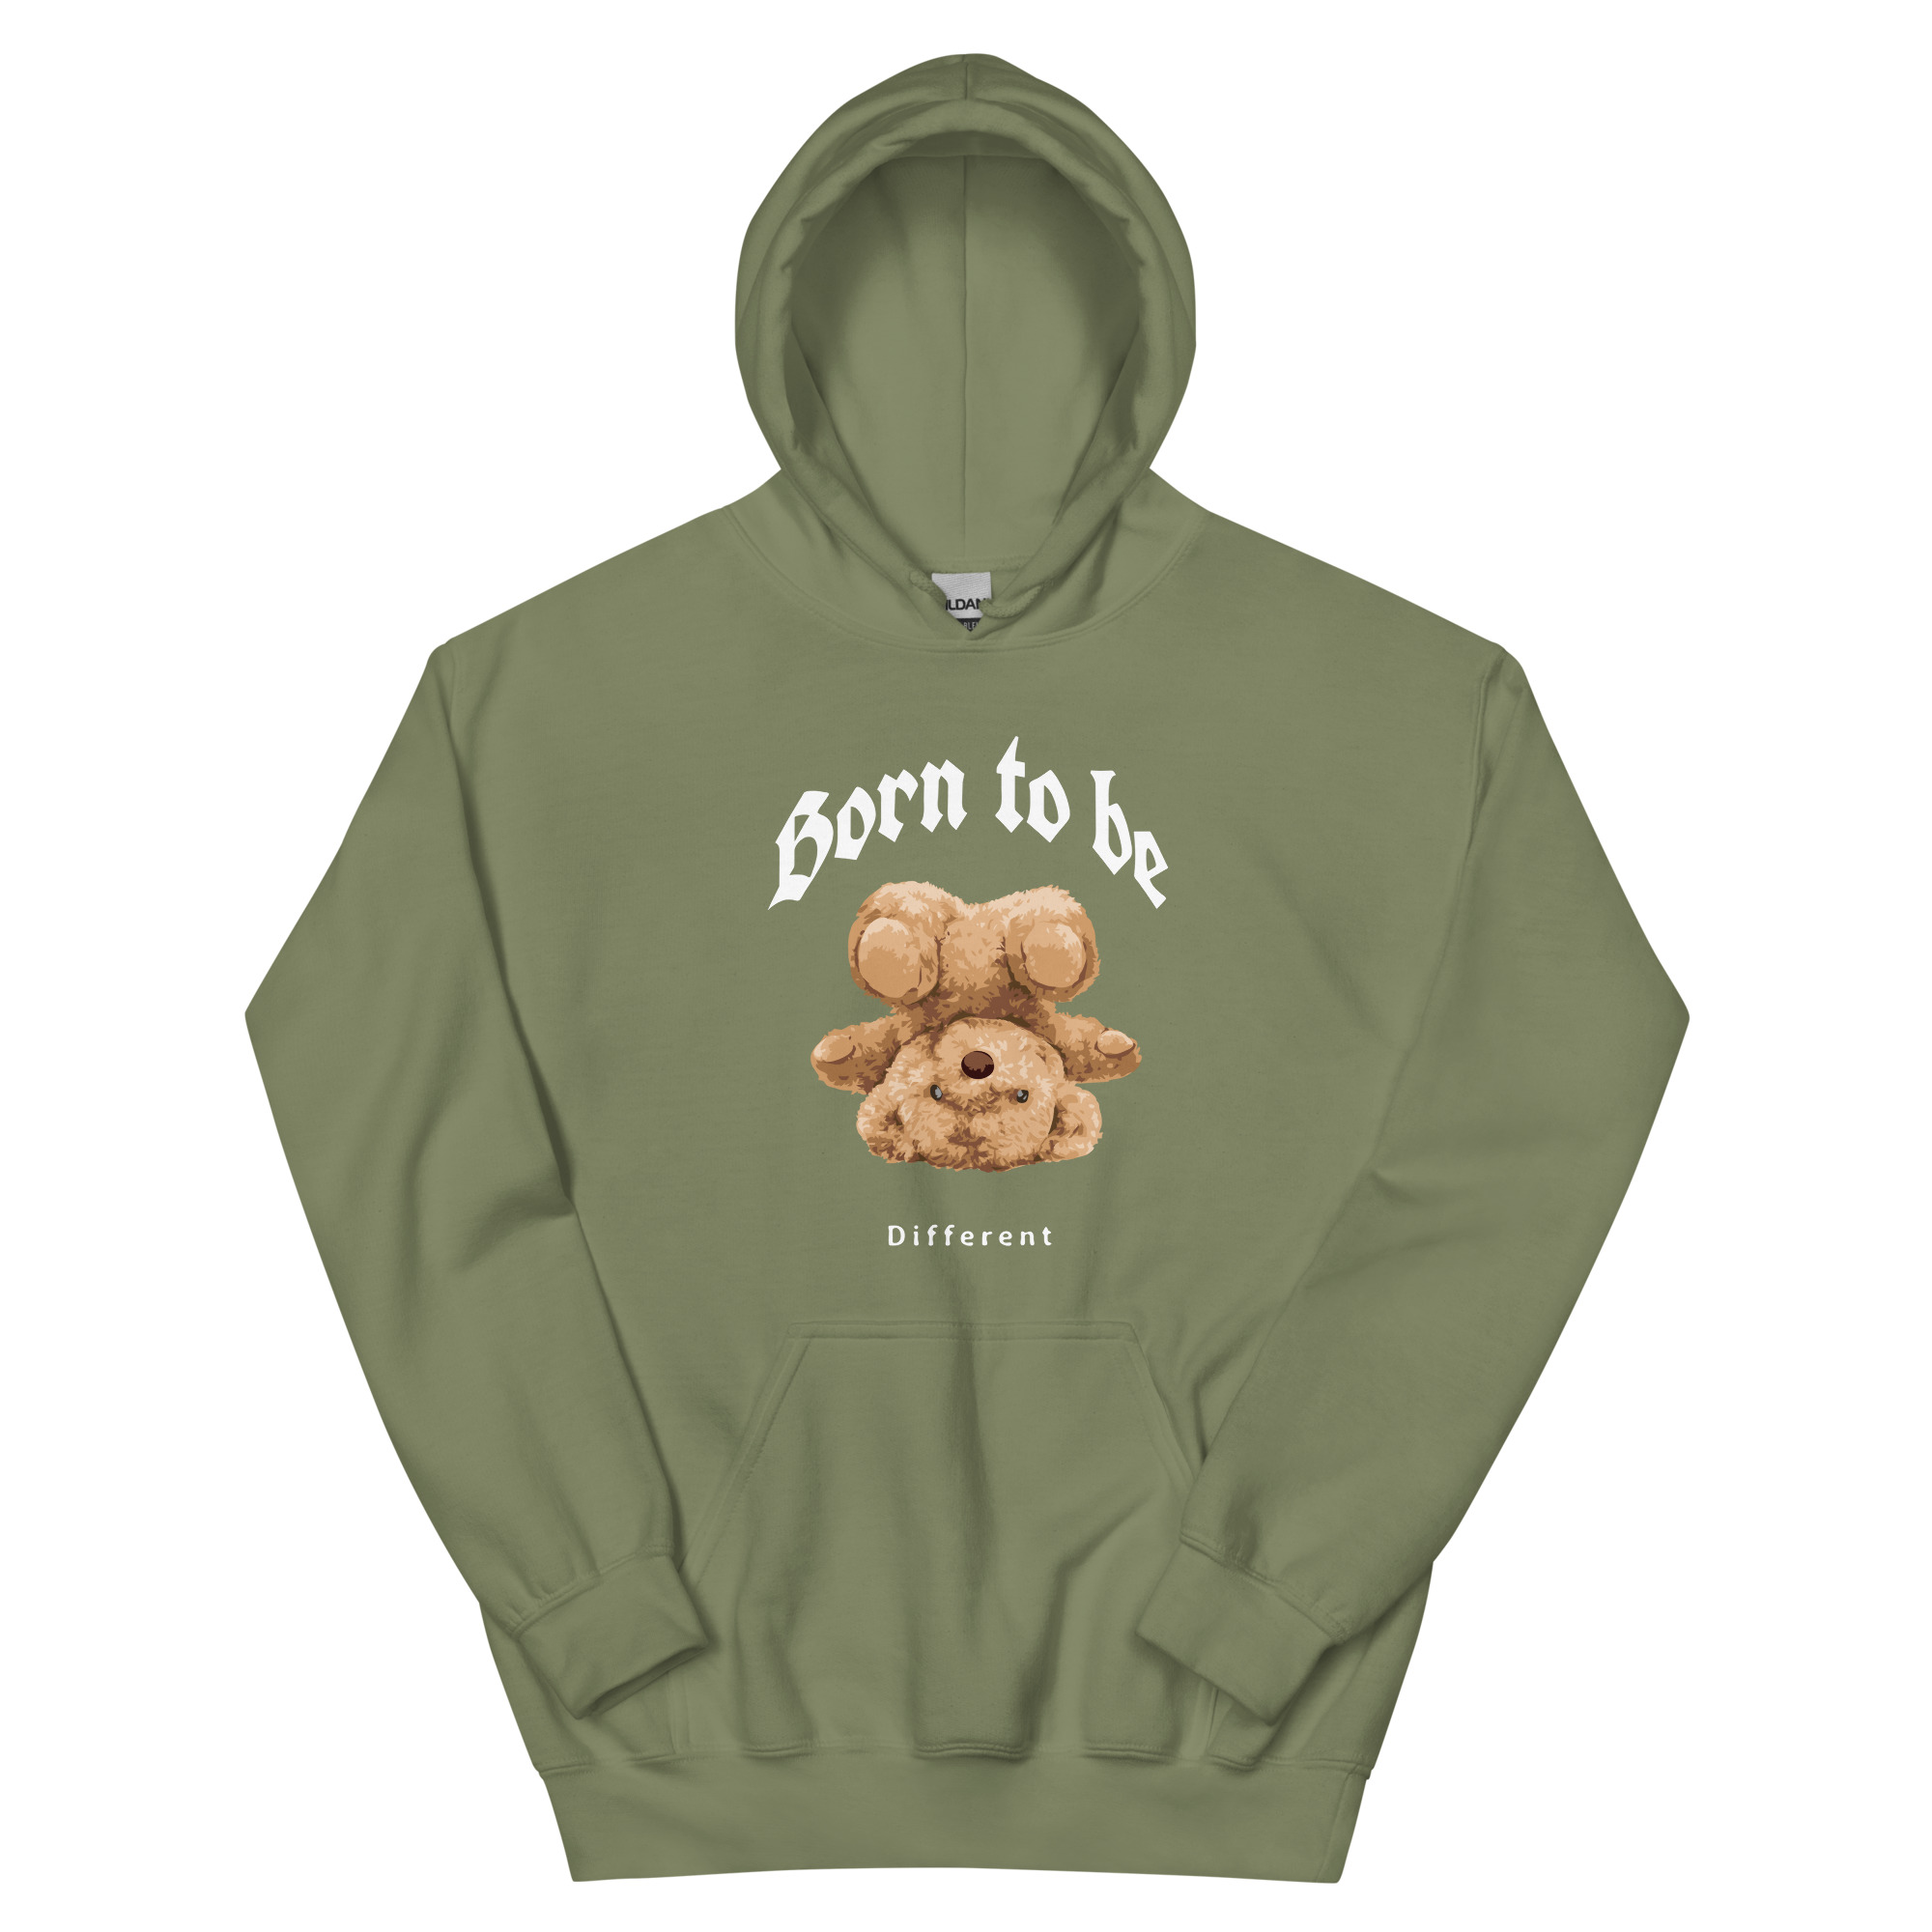 unisex-heavy-blend-hoodie-military-green-front-65377d8c6021a.jpg